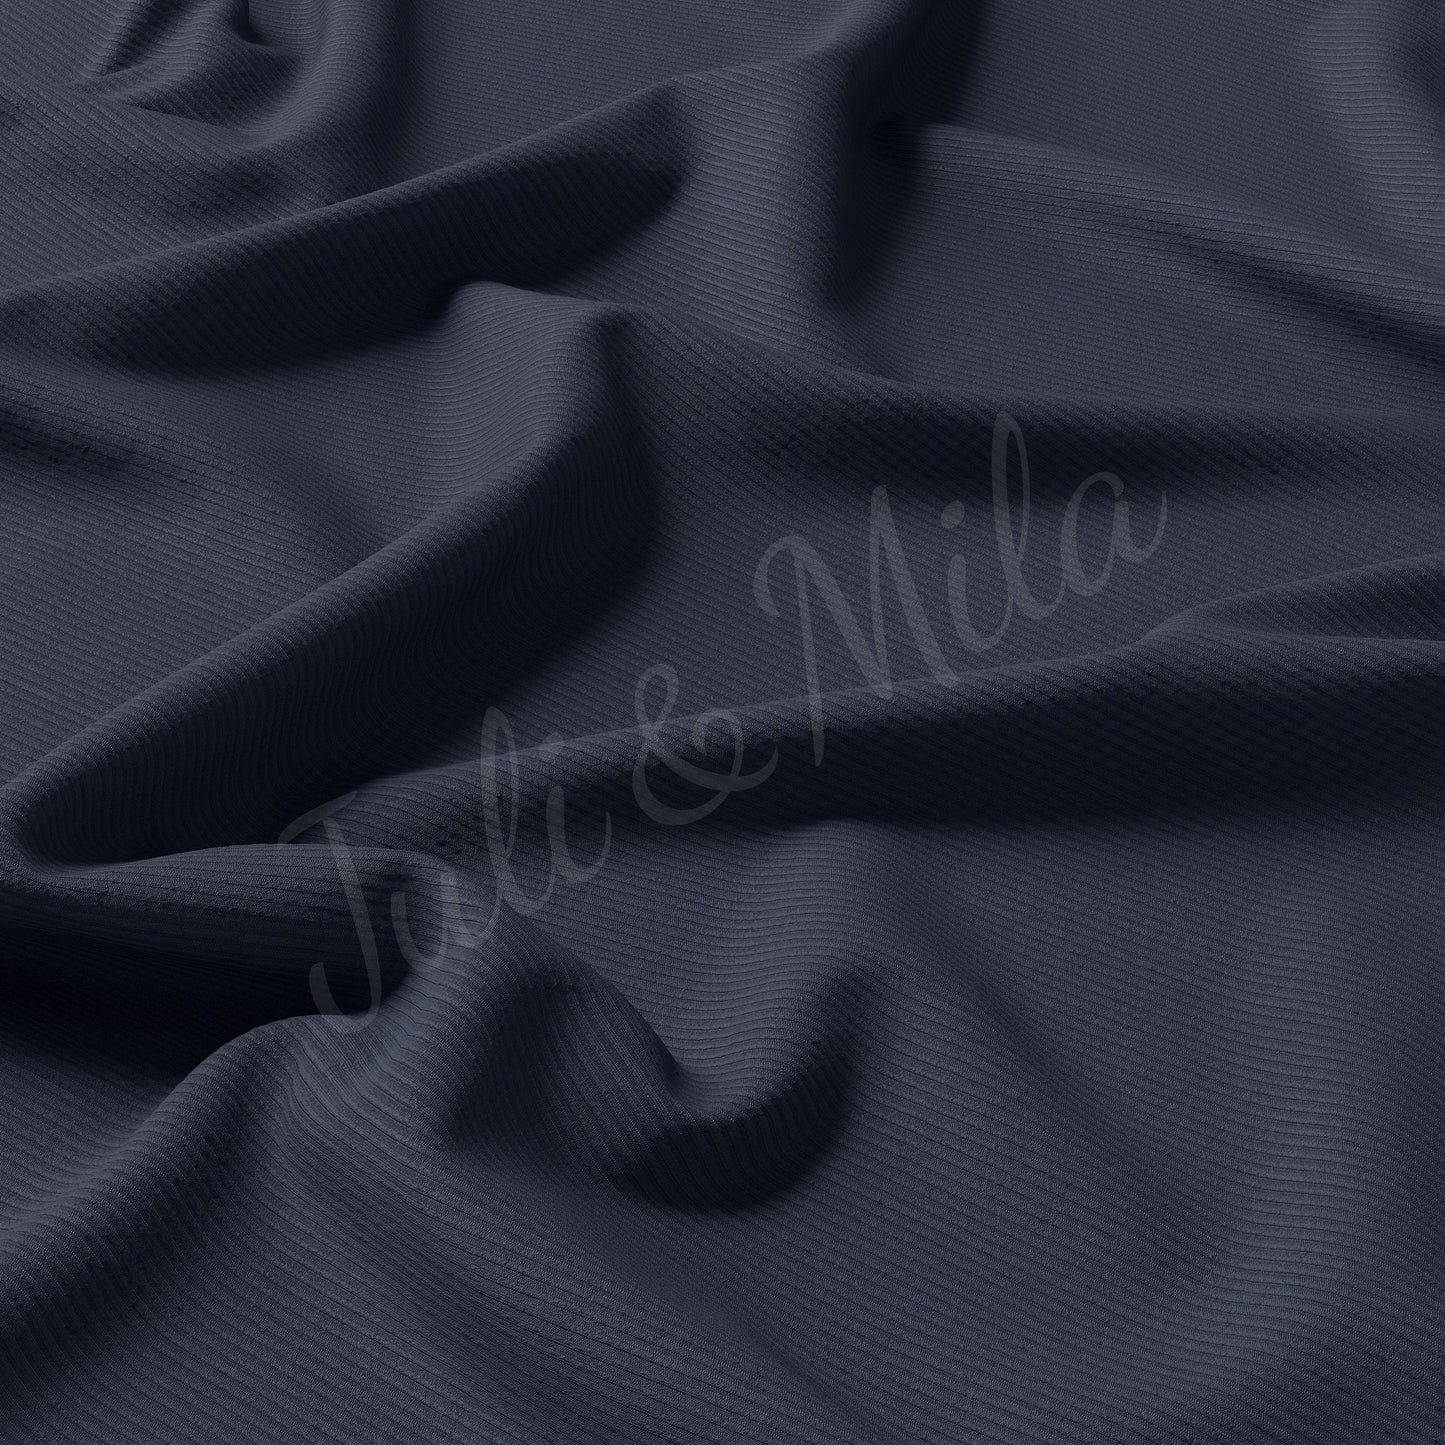 Navy Rib Knit Fabric by the Yard Ribbed Jersey Stretchy Soft Polyester Stretch Fabric 1 Yard